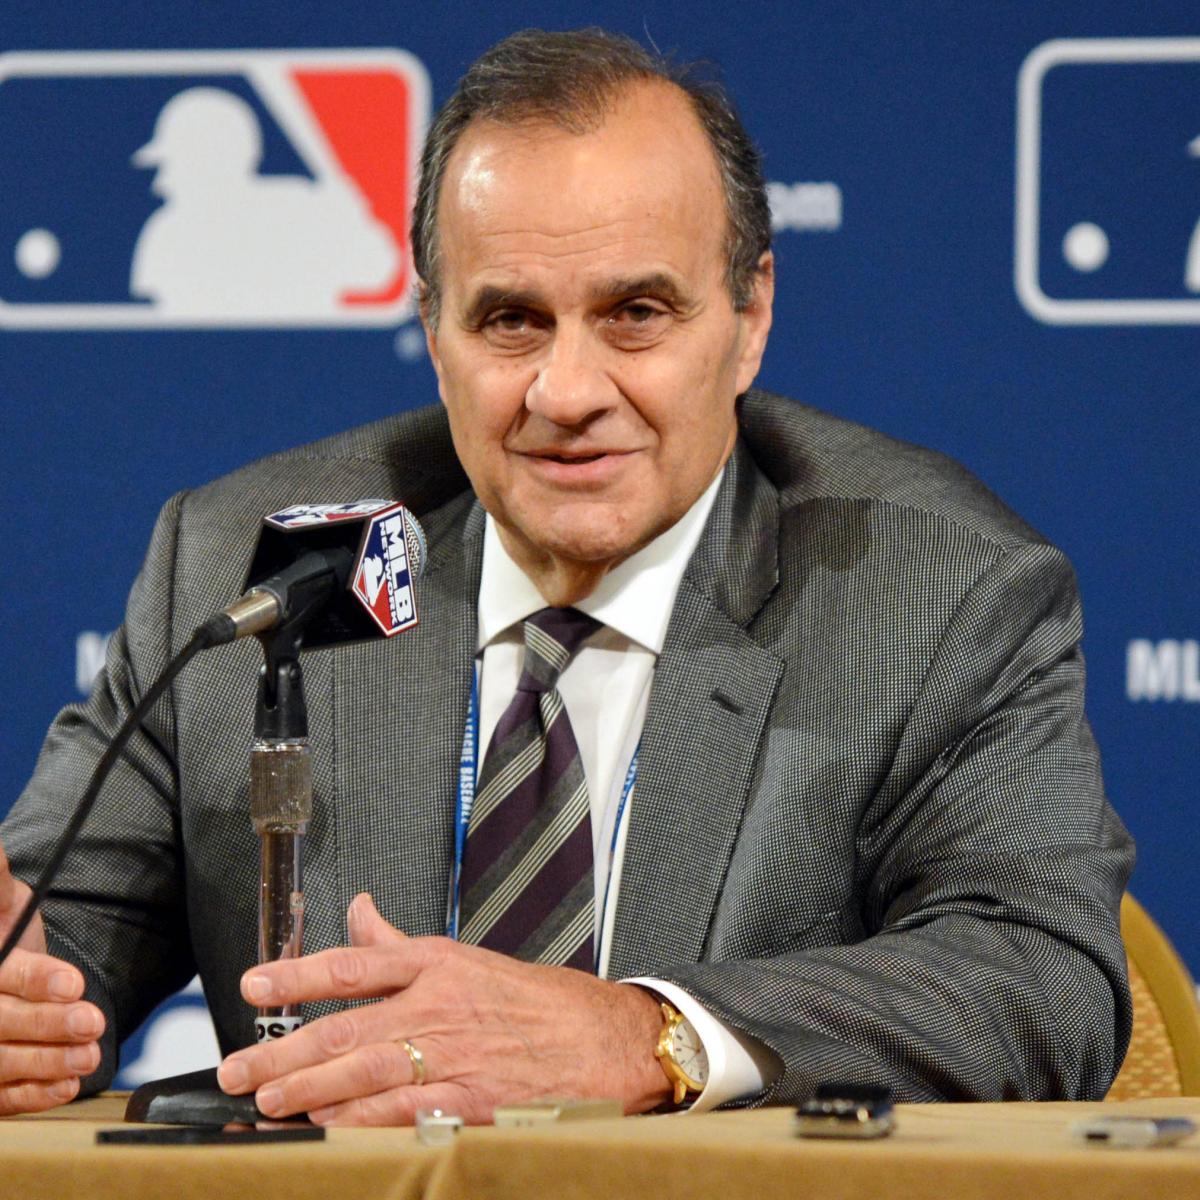 Coach Joe Torre managed the New York Yankees from 1996 to 2007. The Yankees  reached the post season each y…